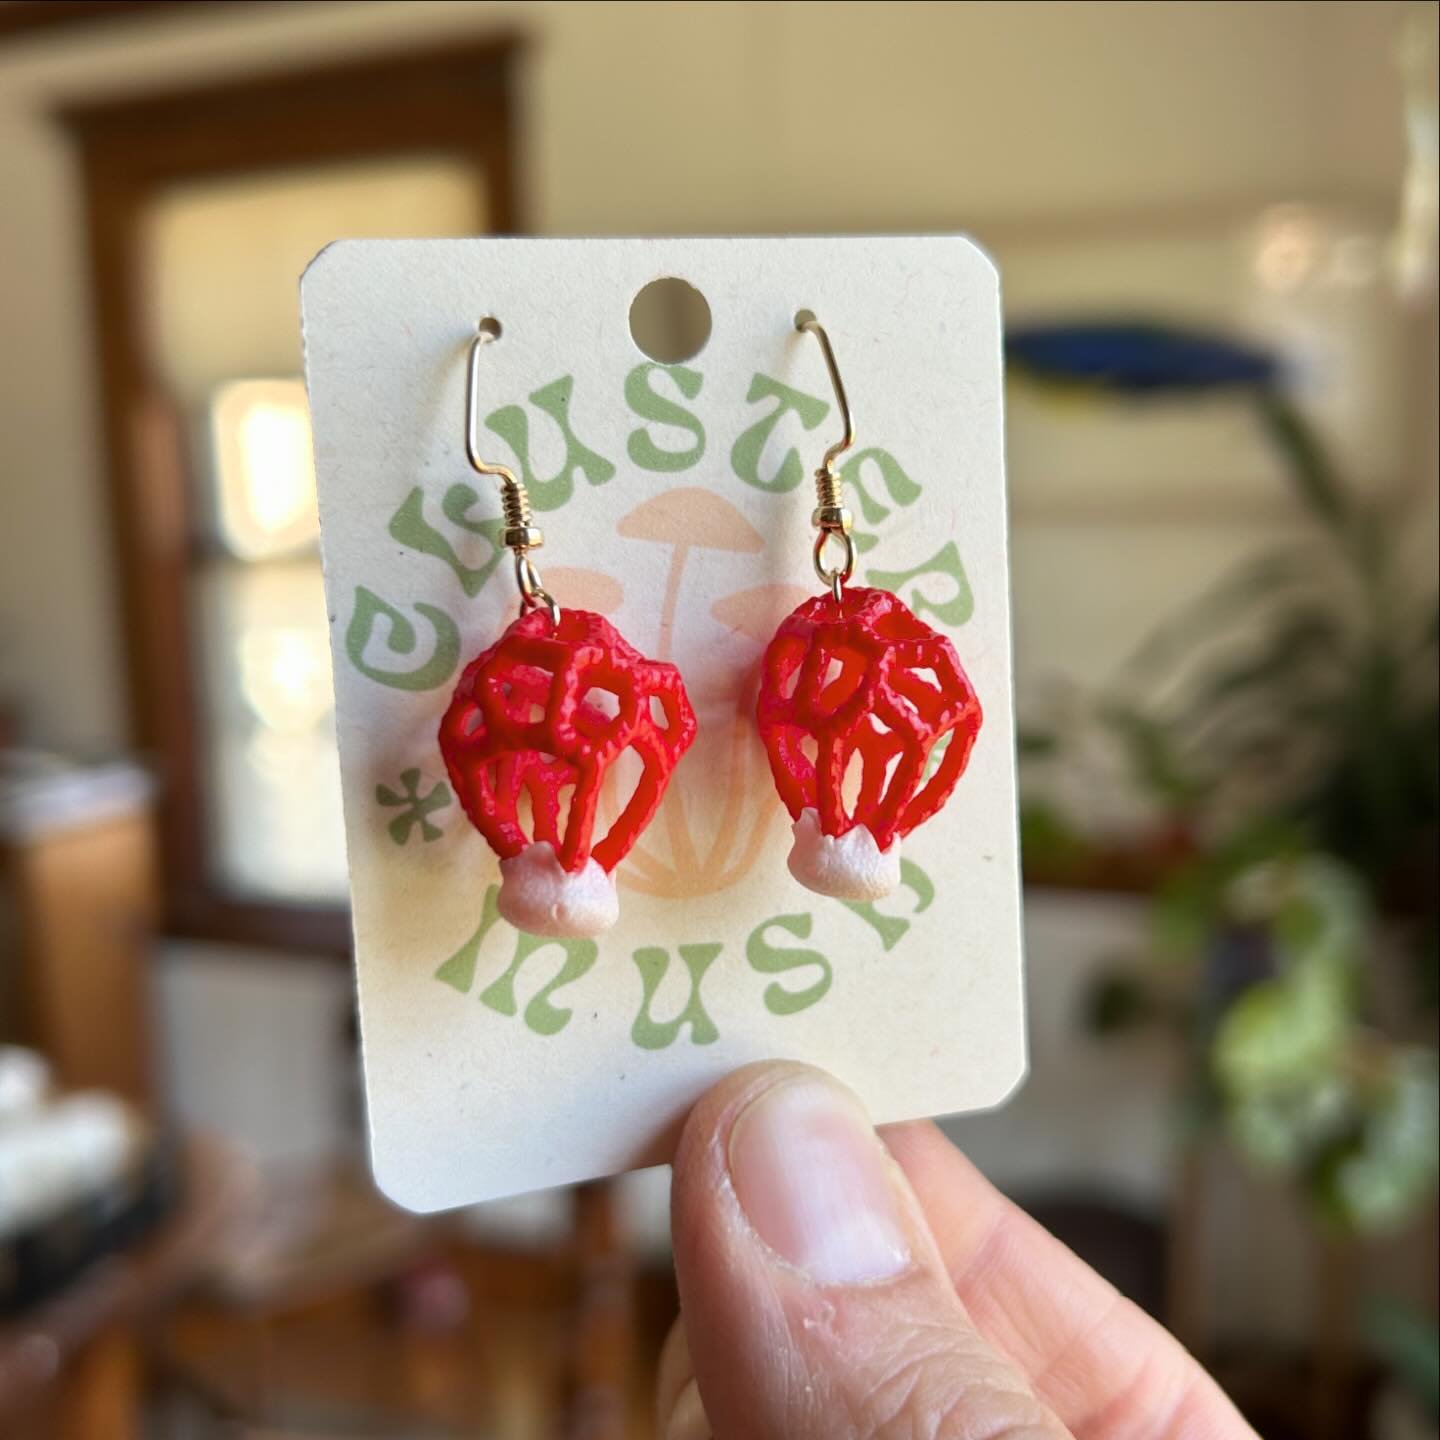 Wow! Right!?
.
Our first set of earrings from @clustermush went pretty fast so we refilled and got few new varieties!
.
The cage stink horns are just too cool! And of course let&rsquo;s be seasonal with the morels:)
.
@pizzaprojectboston got a rad ne